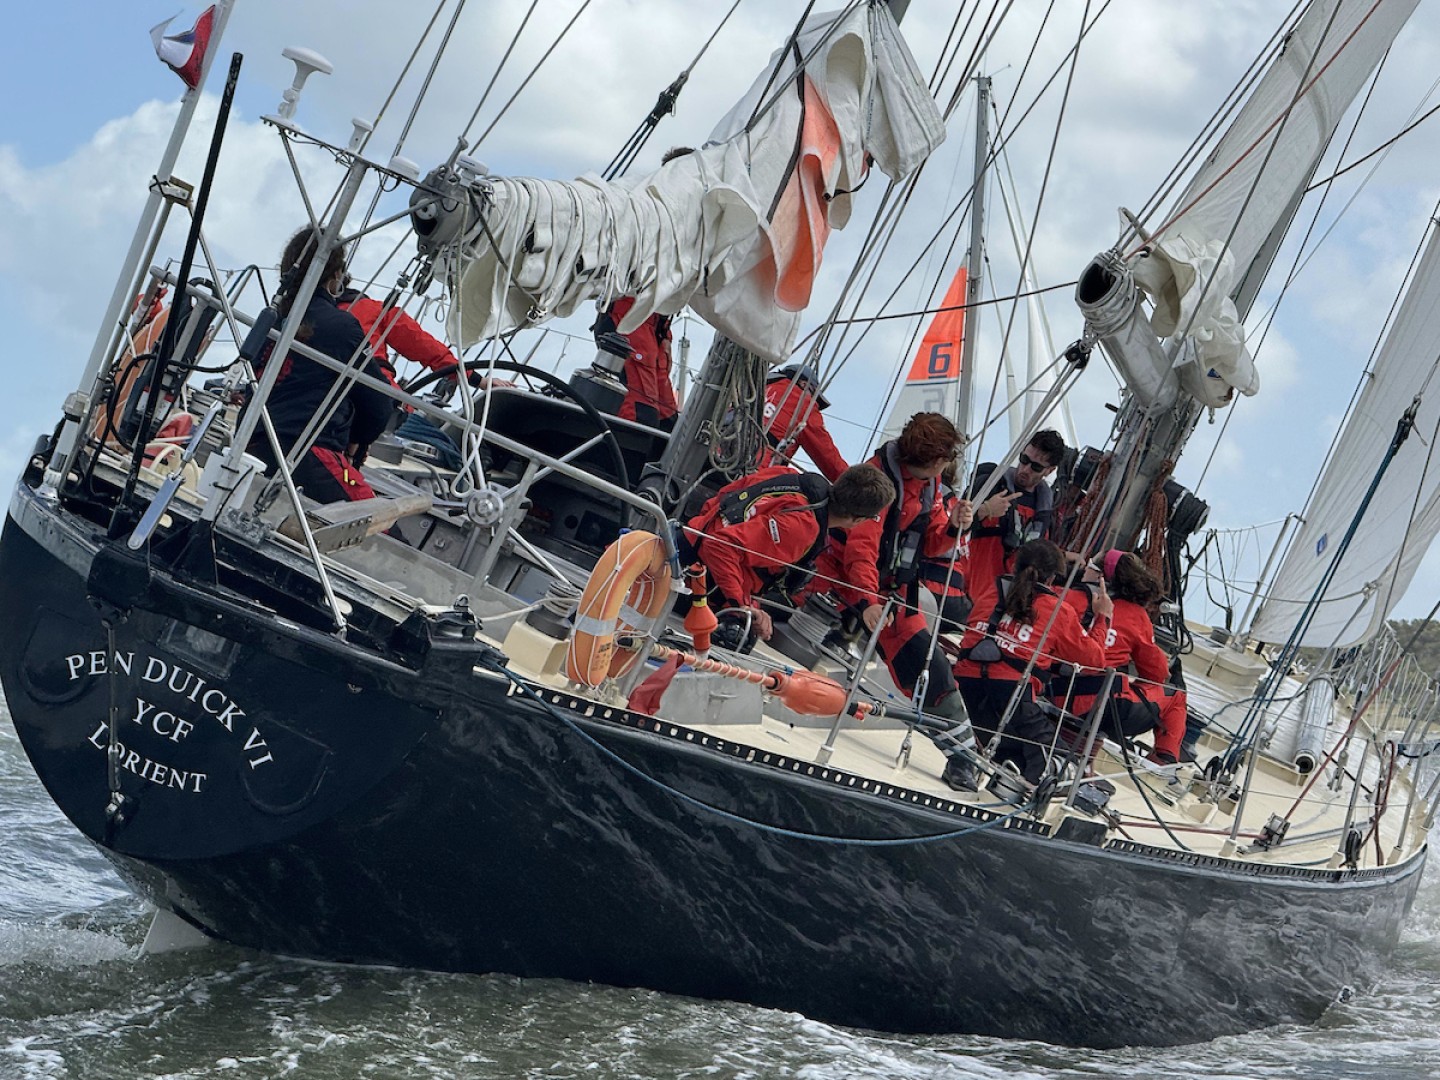 Pen Duick VI at the start of Leg 4 Punta del Este to Cowes - currently leading in line honours and IRC ranking for the leg. Credit: Aïda Valceanu/ OGR2023